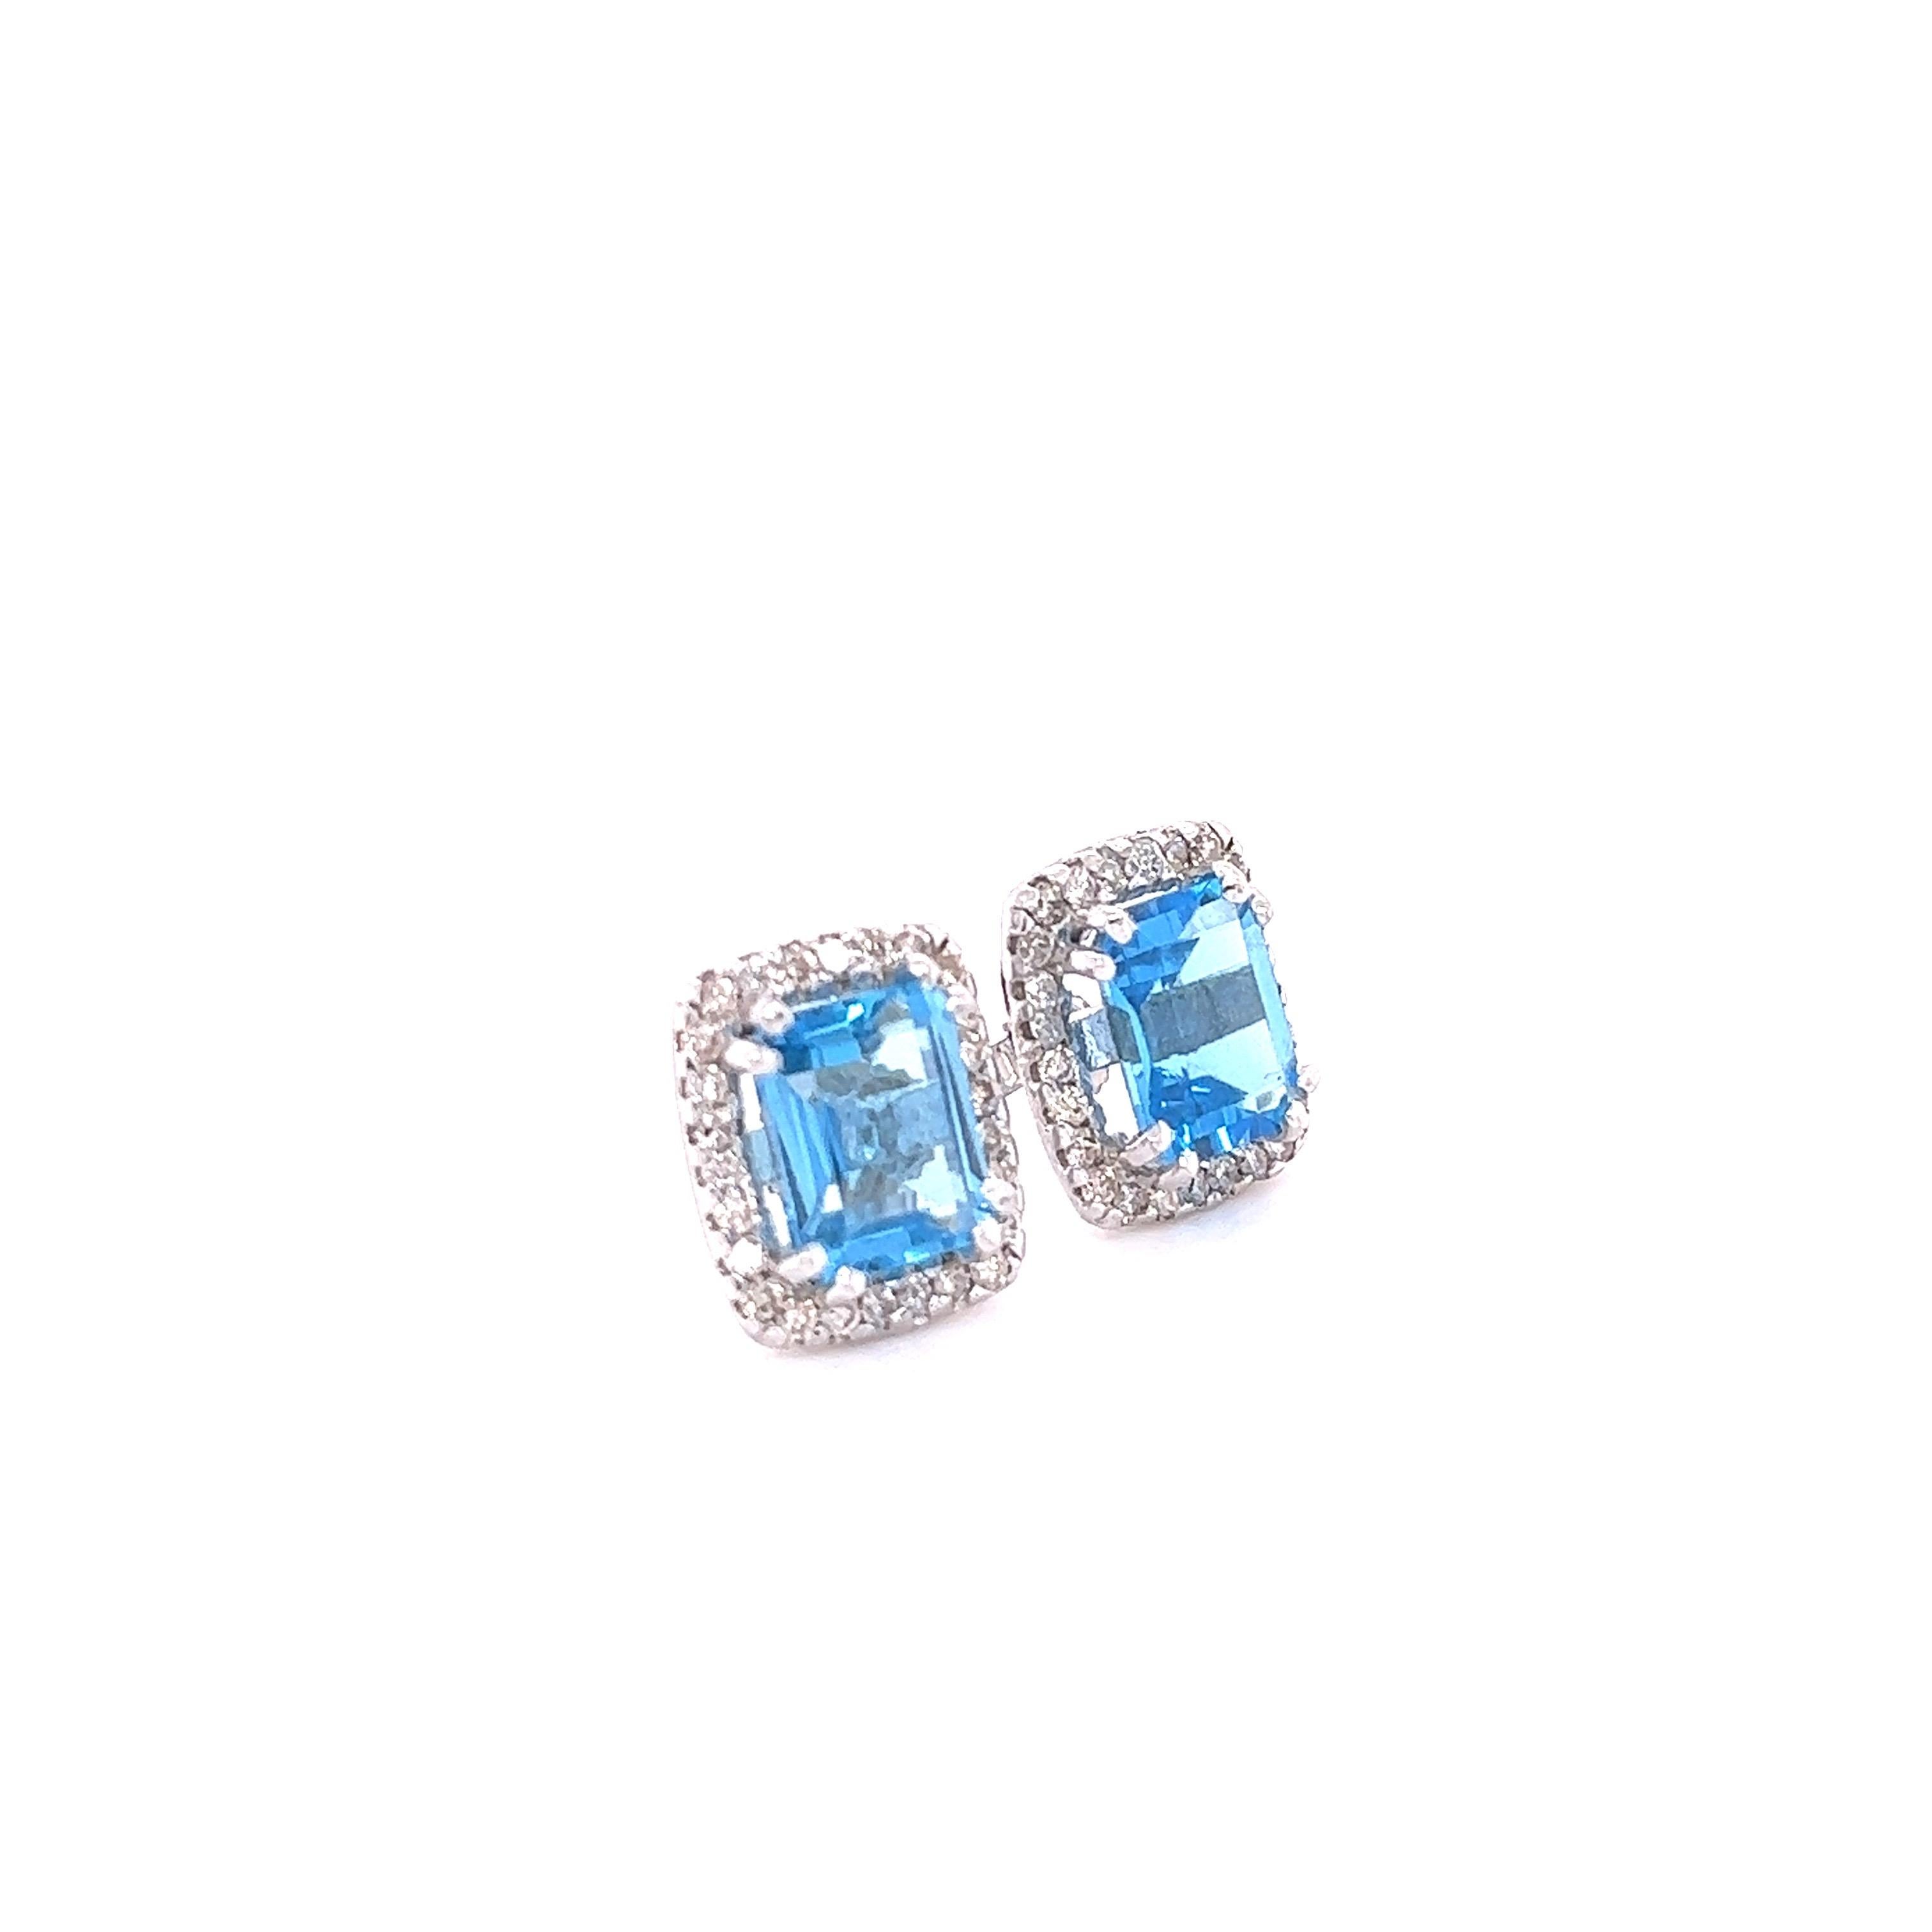 These earrings have Natural Emerald Cut Blue Topaz that weigh 5.71 carats and Round Cut Natural Diamonds that weigh 0.71 carats. The total carat weight of the earrings are 6.42 carats. 

The earrings measure at approximately 13 mm x 11 mm and are